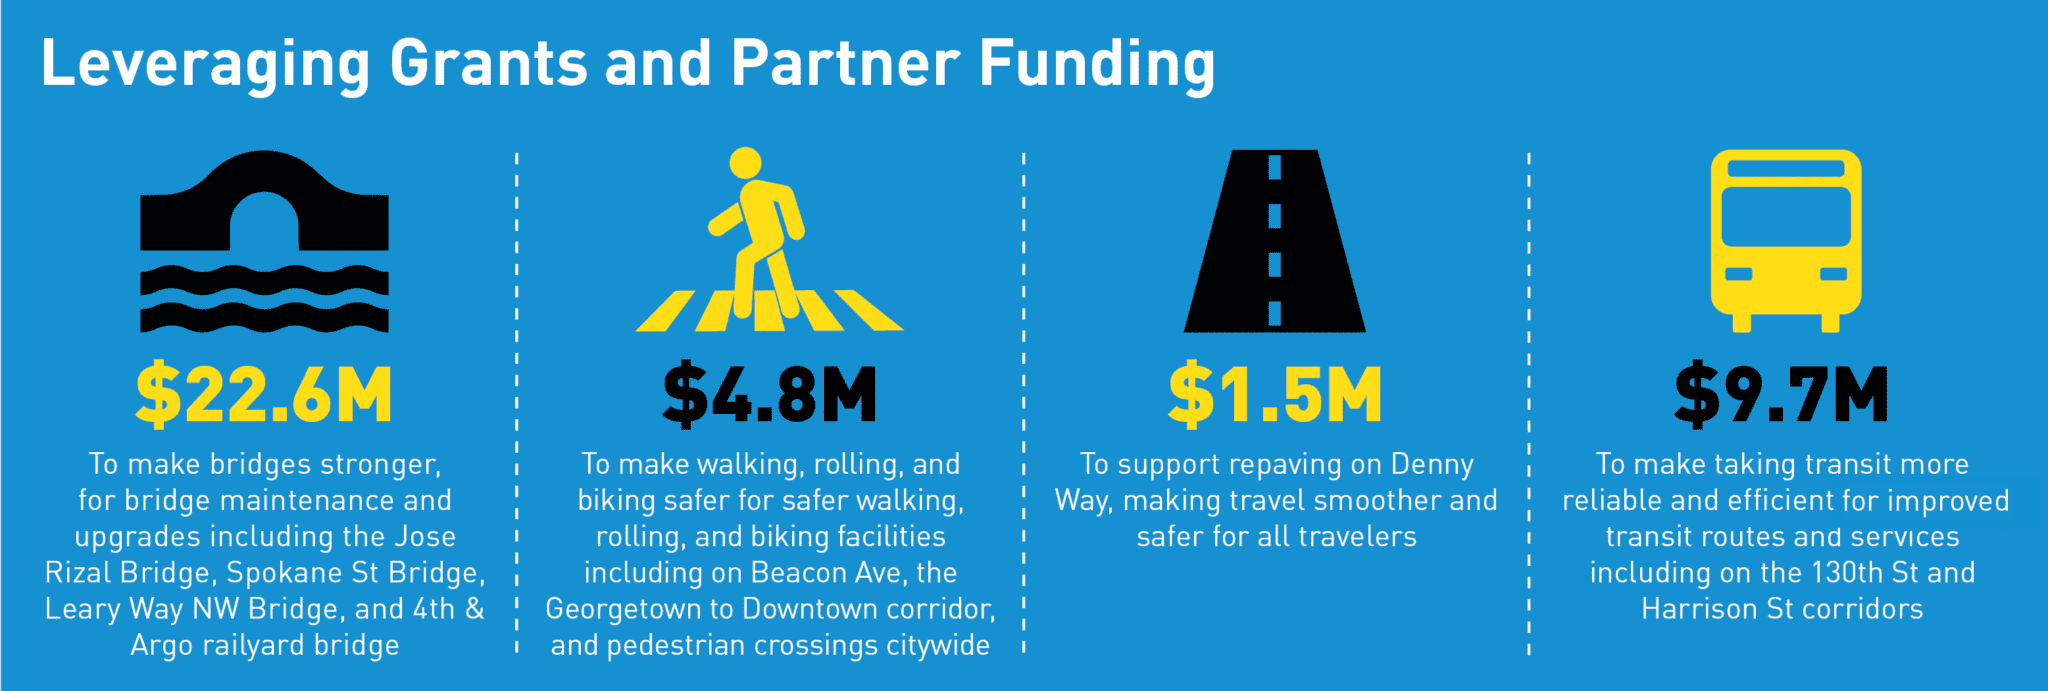 Infographic highlighting leveraging grants and partner funding, including $22.6 million to make bridges stronger, for bridge maintenance, and upgrades to several bridges; $4.8 million to make walking, rolling, and biking for several facilities in Seattle, $1.5 million to support repaving on Denny Way, and $9.7 million to make transit more reliable and efficient.